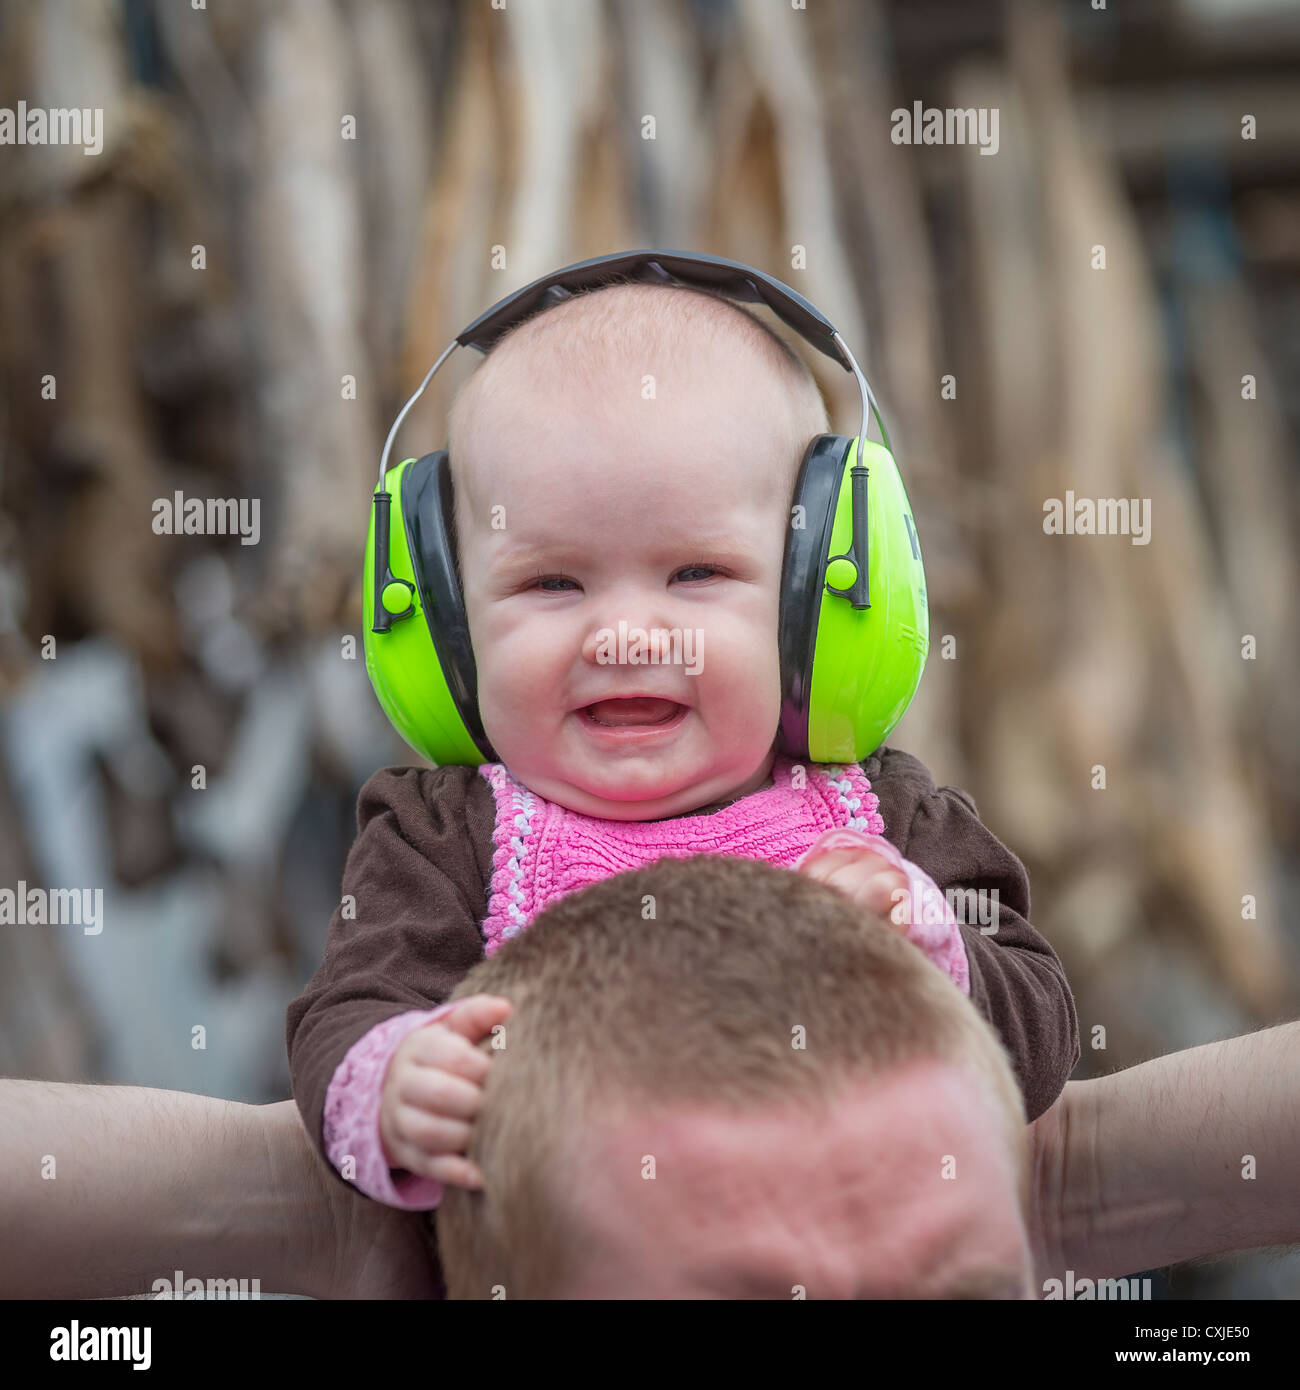 Baby wearing noise reduction ear muffs. Protective headphones on young baby at an outdoor festival, Dalvik, Iceland Stock Photo